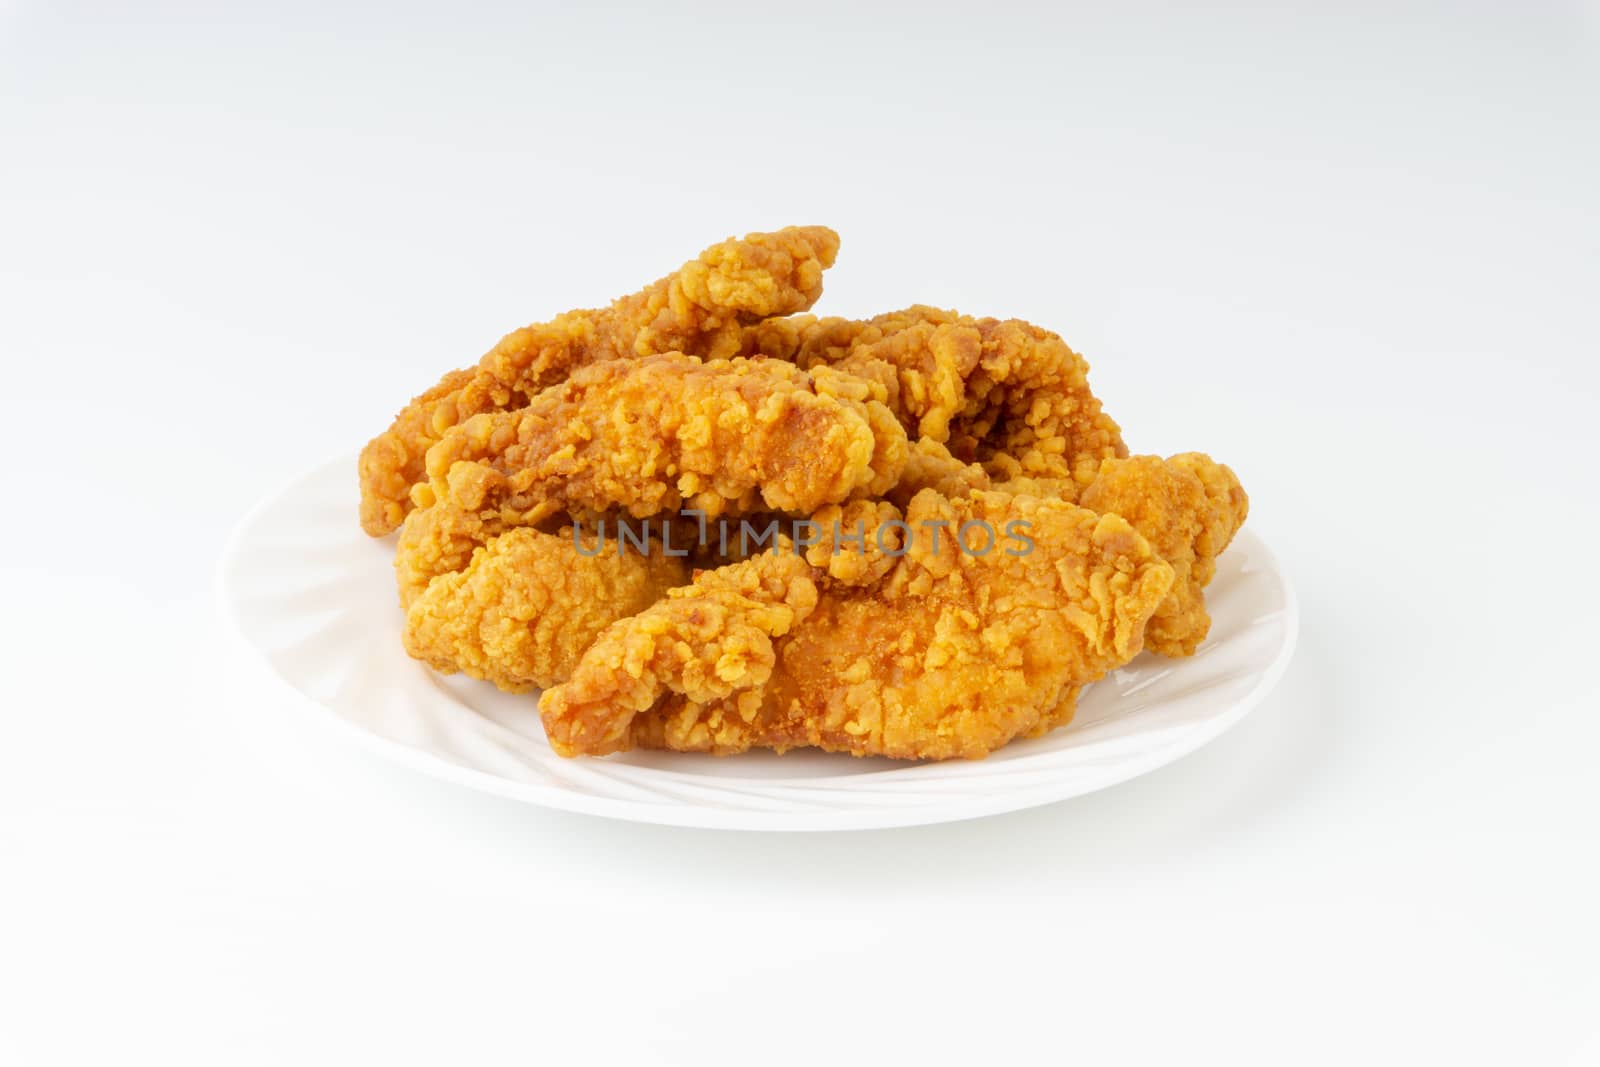 Fried breaded chicken fillet isolated on white background  by silverwings